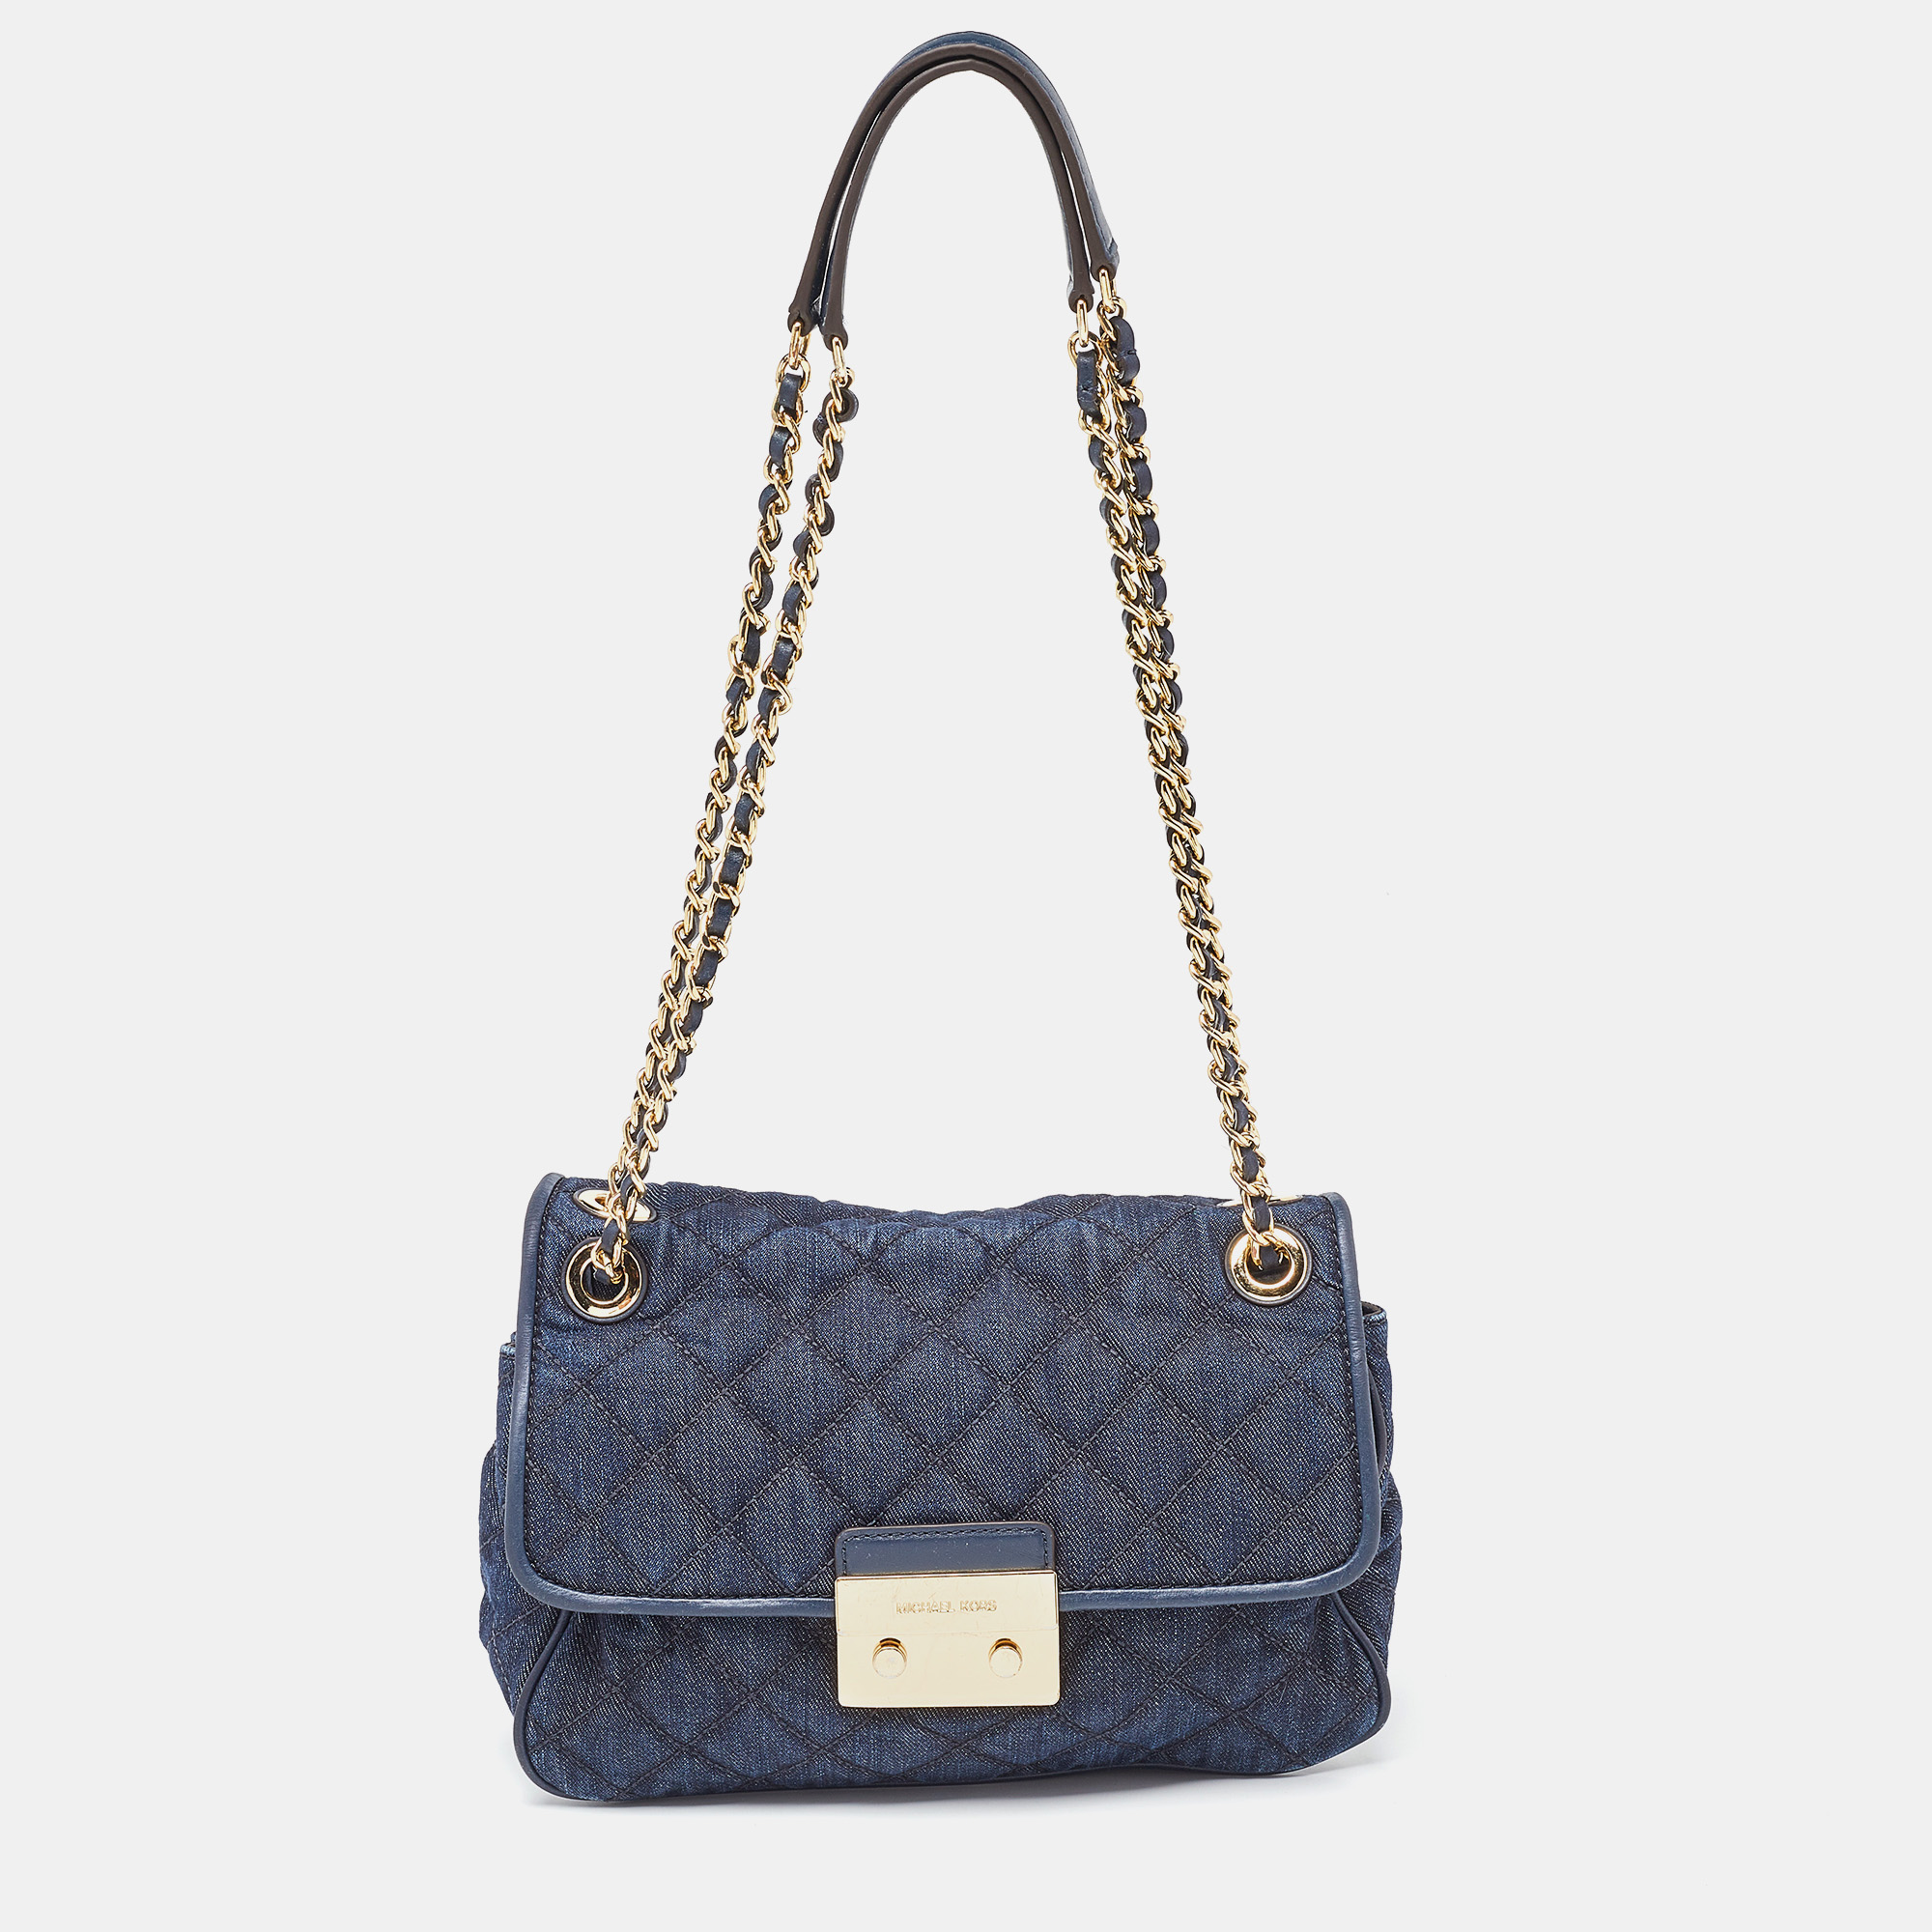 This Michael Kors bag has the right amount of chic and functional details to make it your next purchase. Created from quilted denim and leather it flaunts a branded turn lock on the front dual chain leather handles and a well sized interior. The blue shade of this bag makes it a versatile styling option.